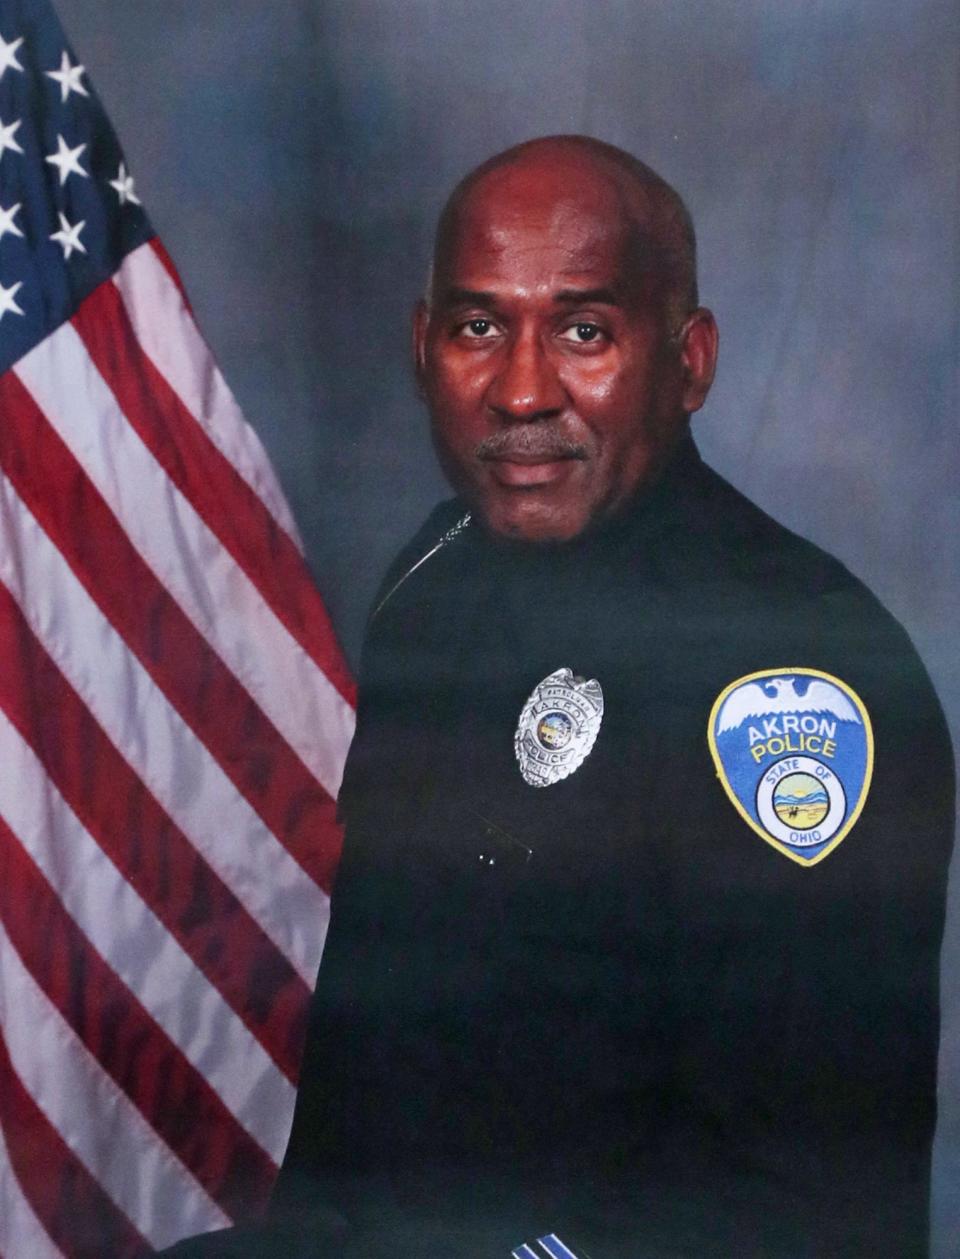 Akron Police Officer Edward Stewart died in 2021 of COVID-19 complications.